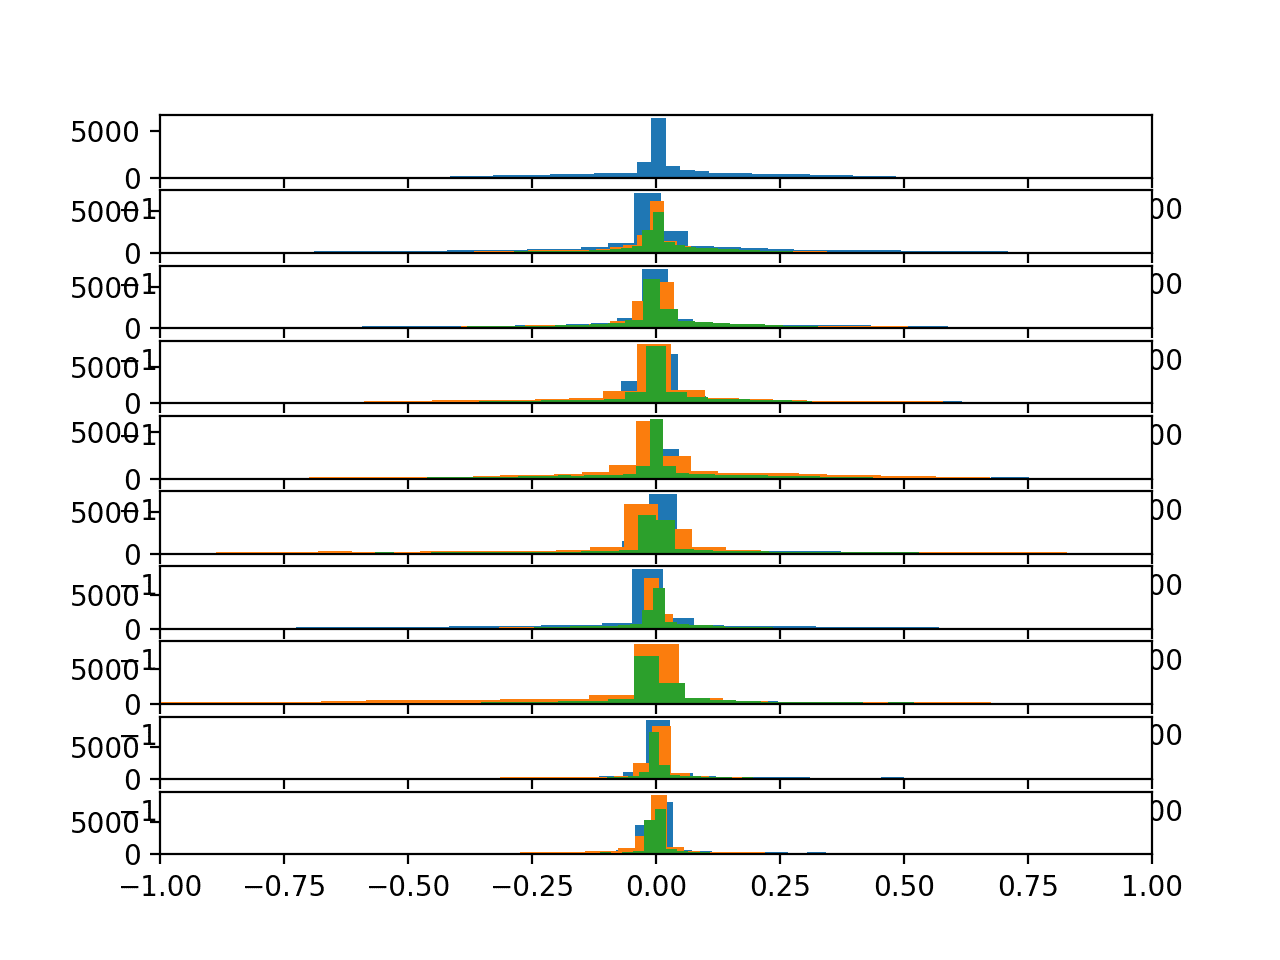 Histograms of the body gyroscope data for 10 subjects